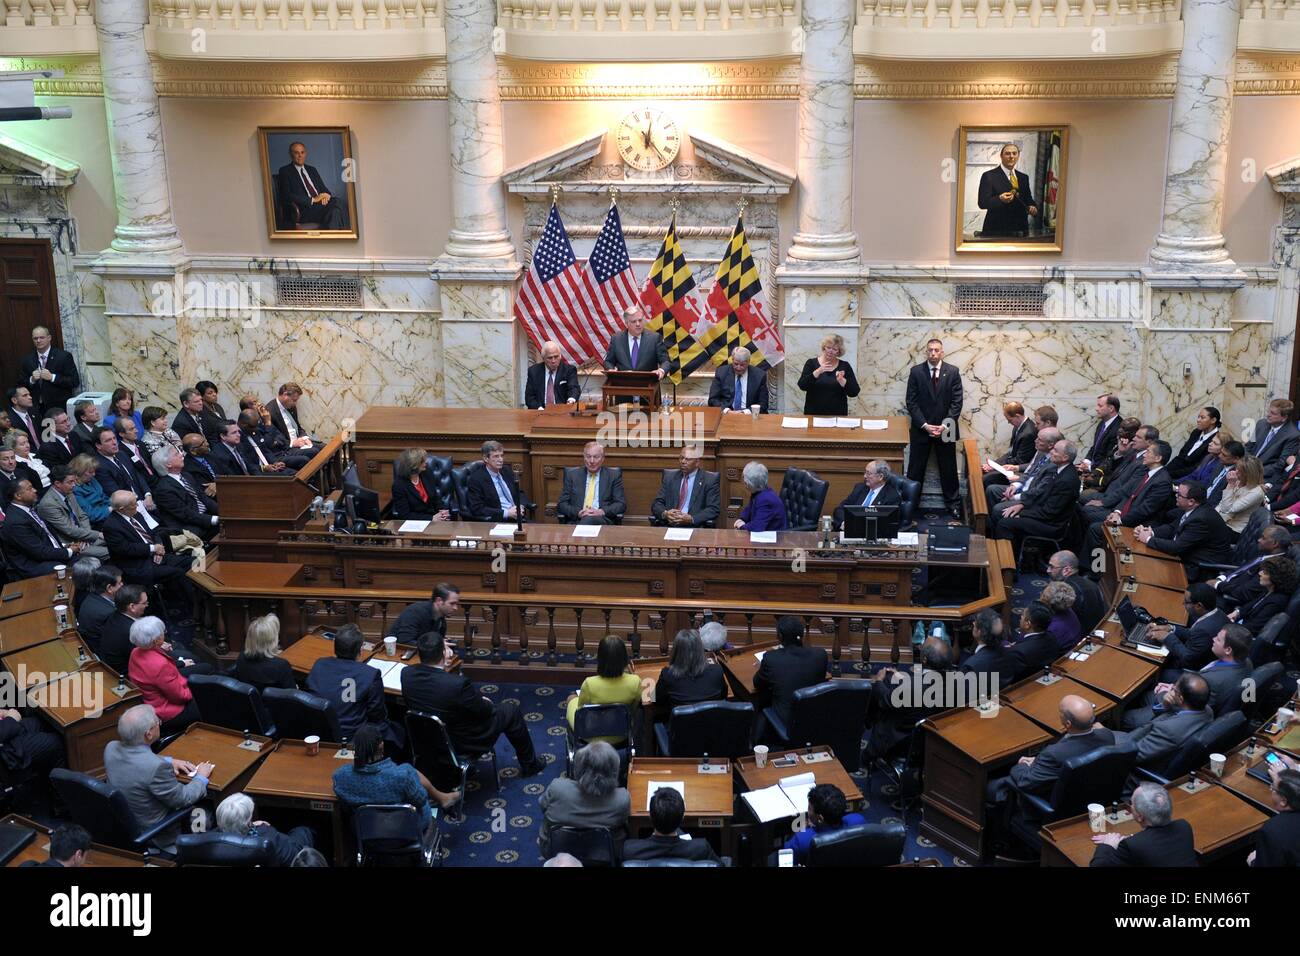 Governor of Maryland Larry Hogan addresses the assembly during the State of the State speech April 4, 2015 in Annapolis, Maryland. Stock Photo